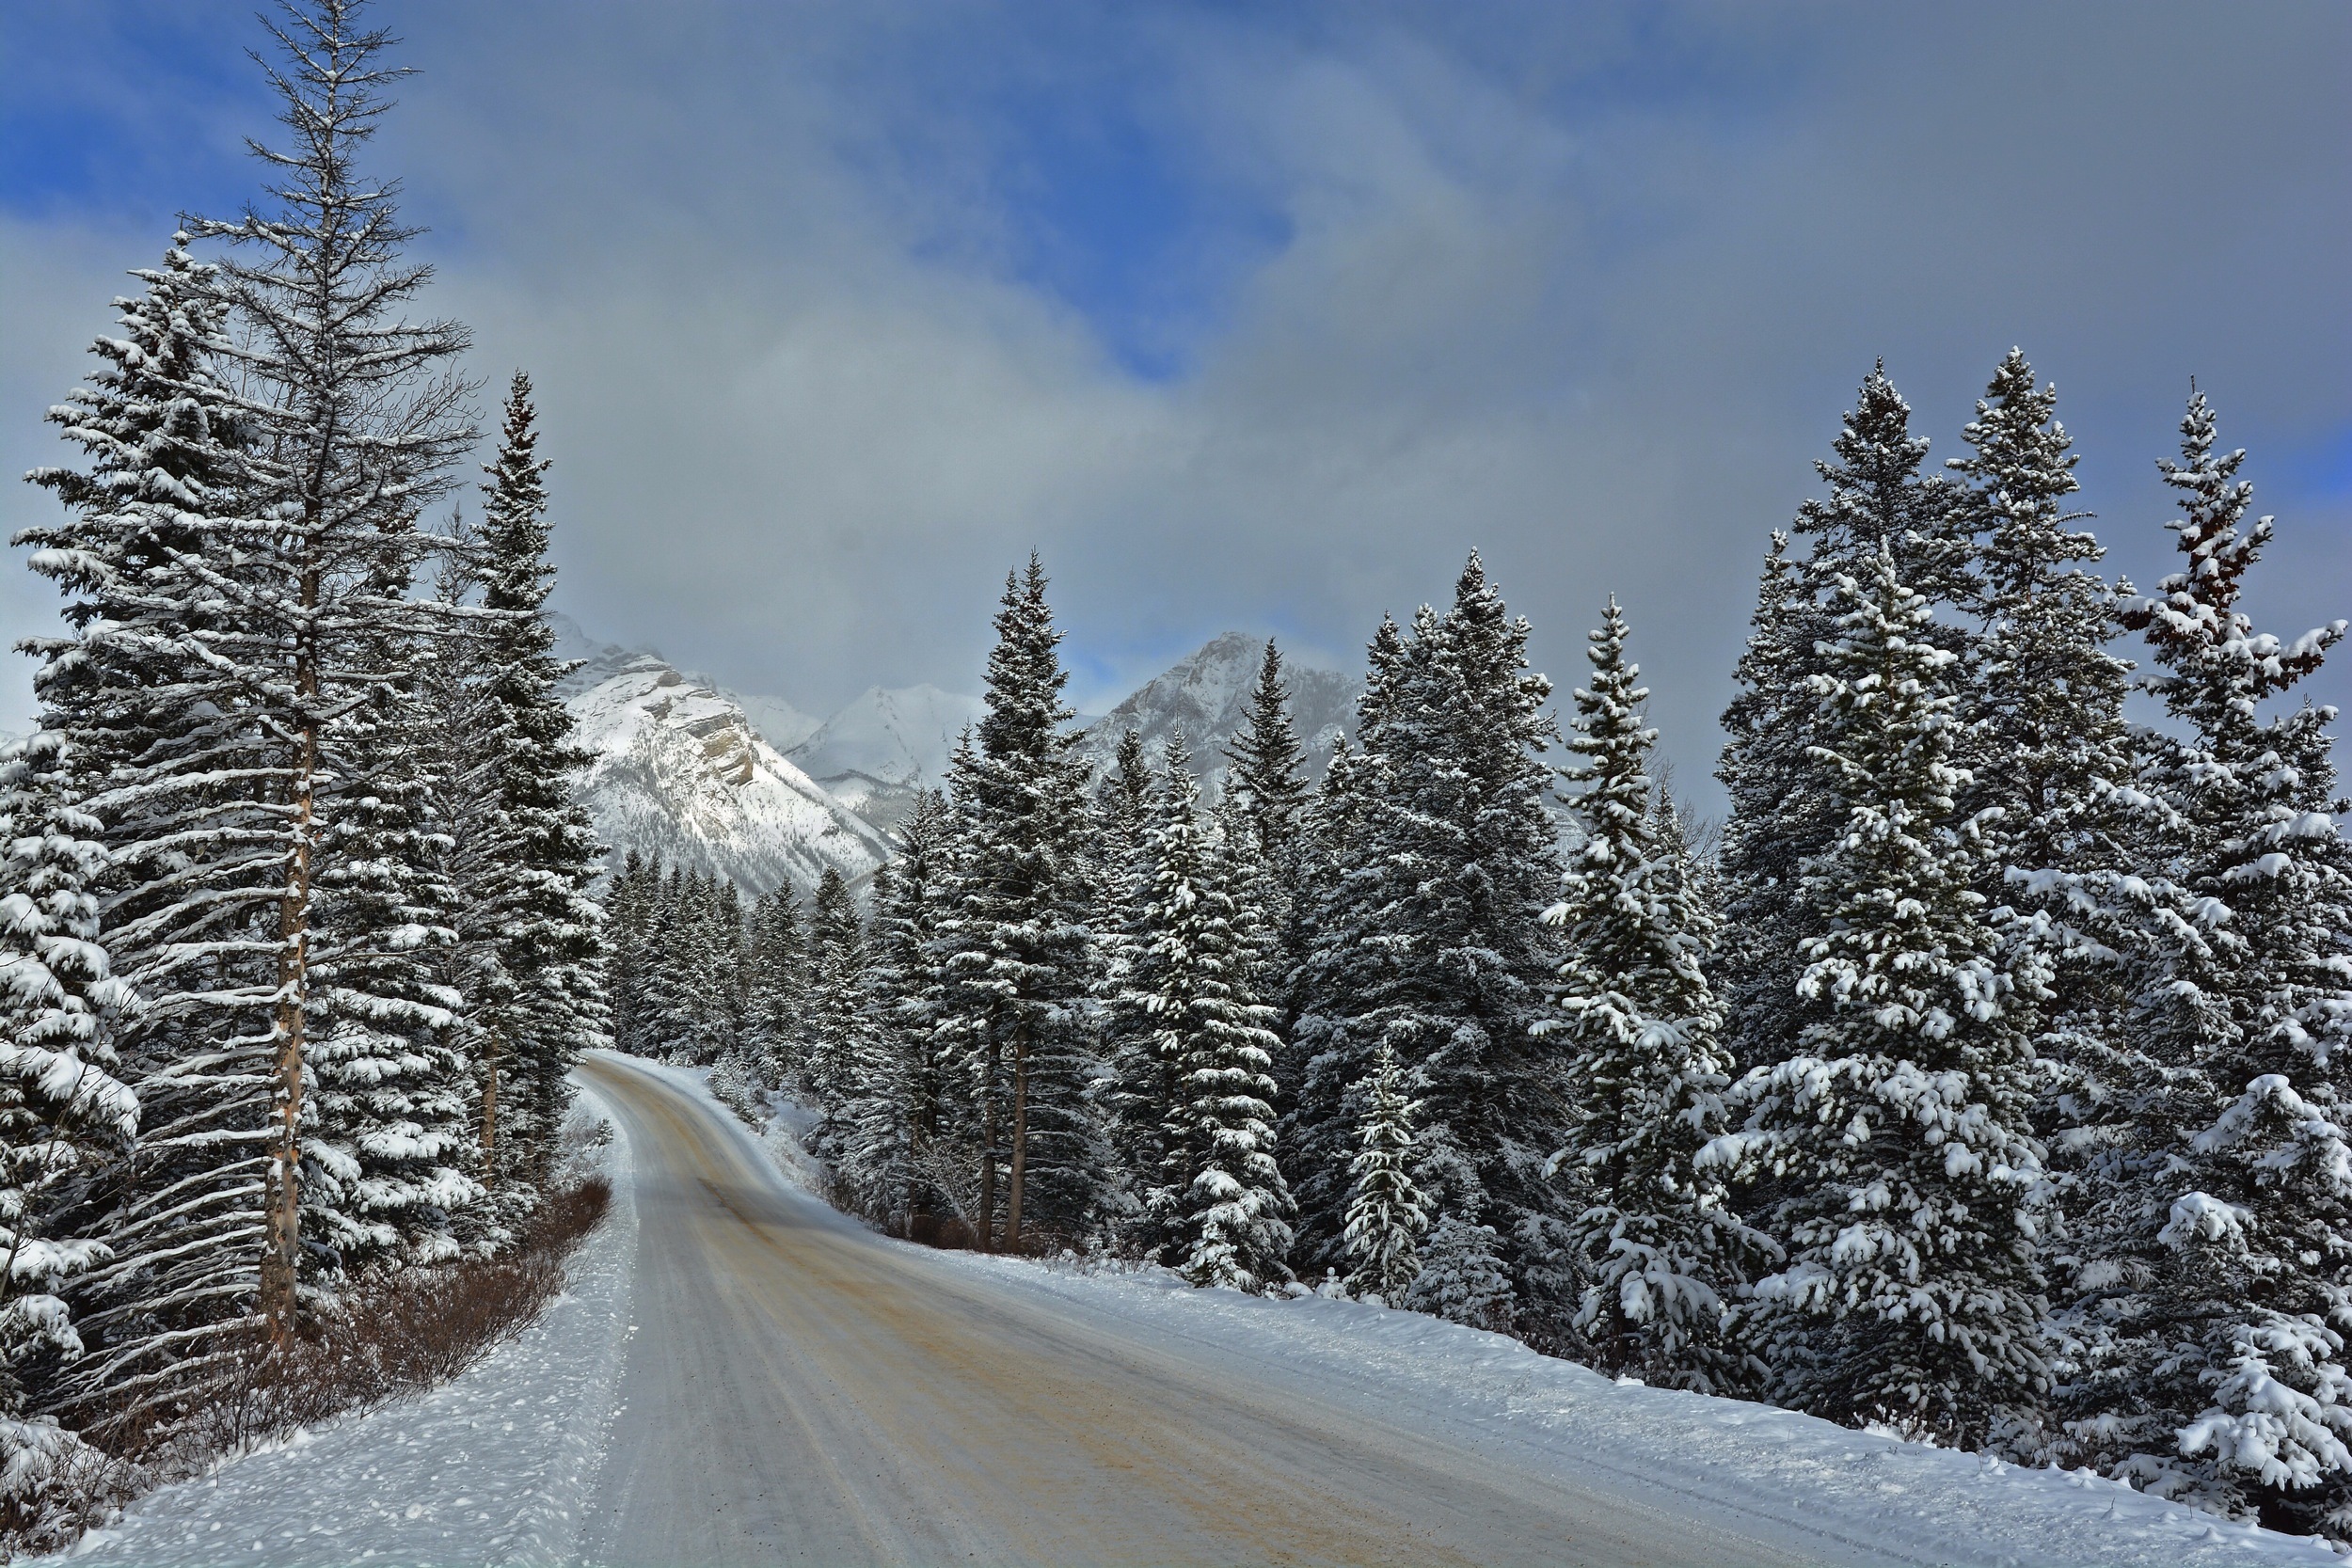 road, man made, banff national park, canada, landscape, mountain, pine, snow, tree, winter